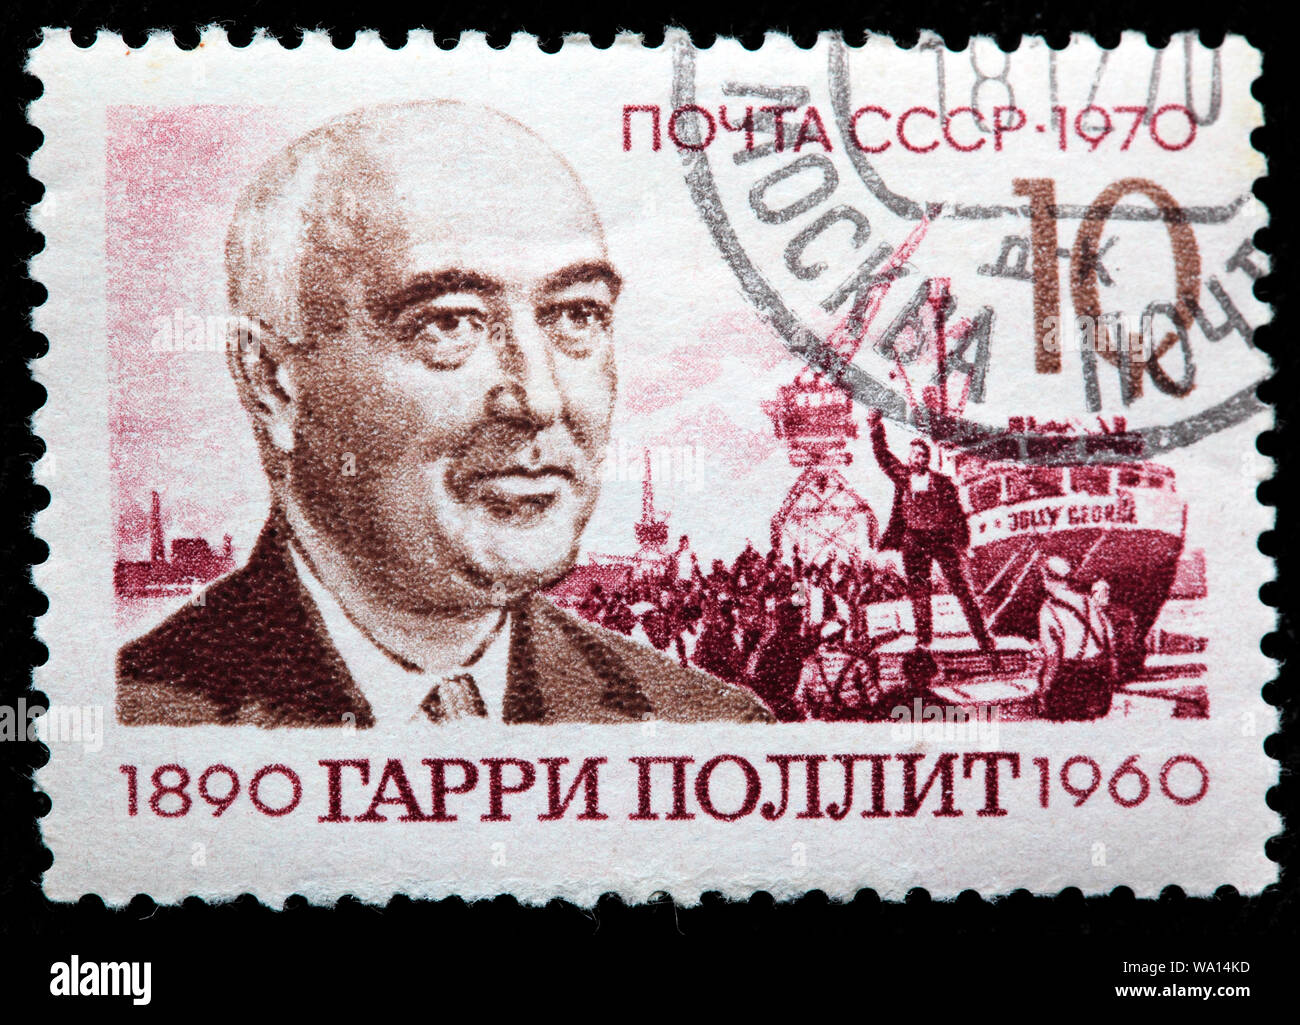 Harry Pollitt (1890-1960), General Secretary of the Communist Party of Great Britain, postage stamp, Russia, USSR, 1970 Stock Photo